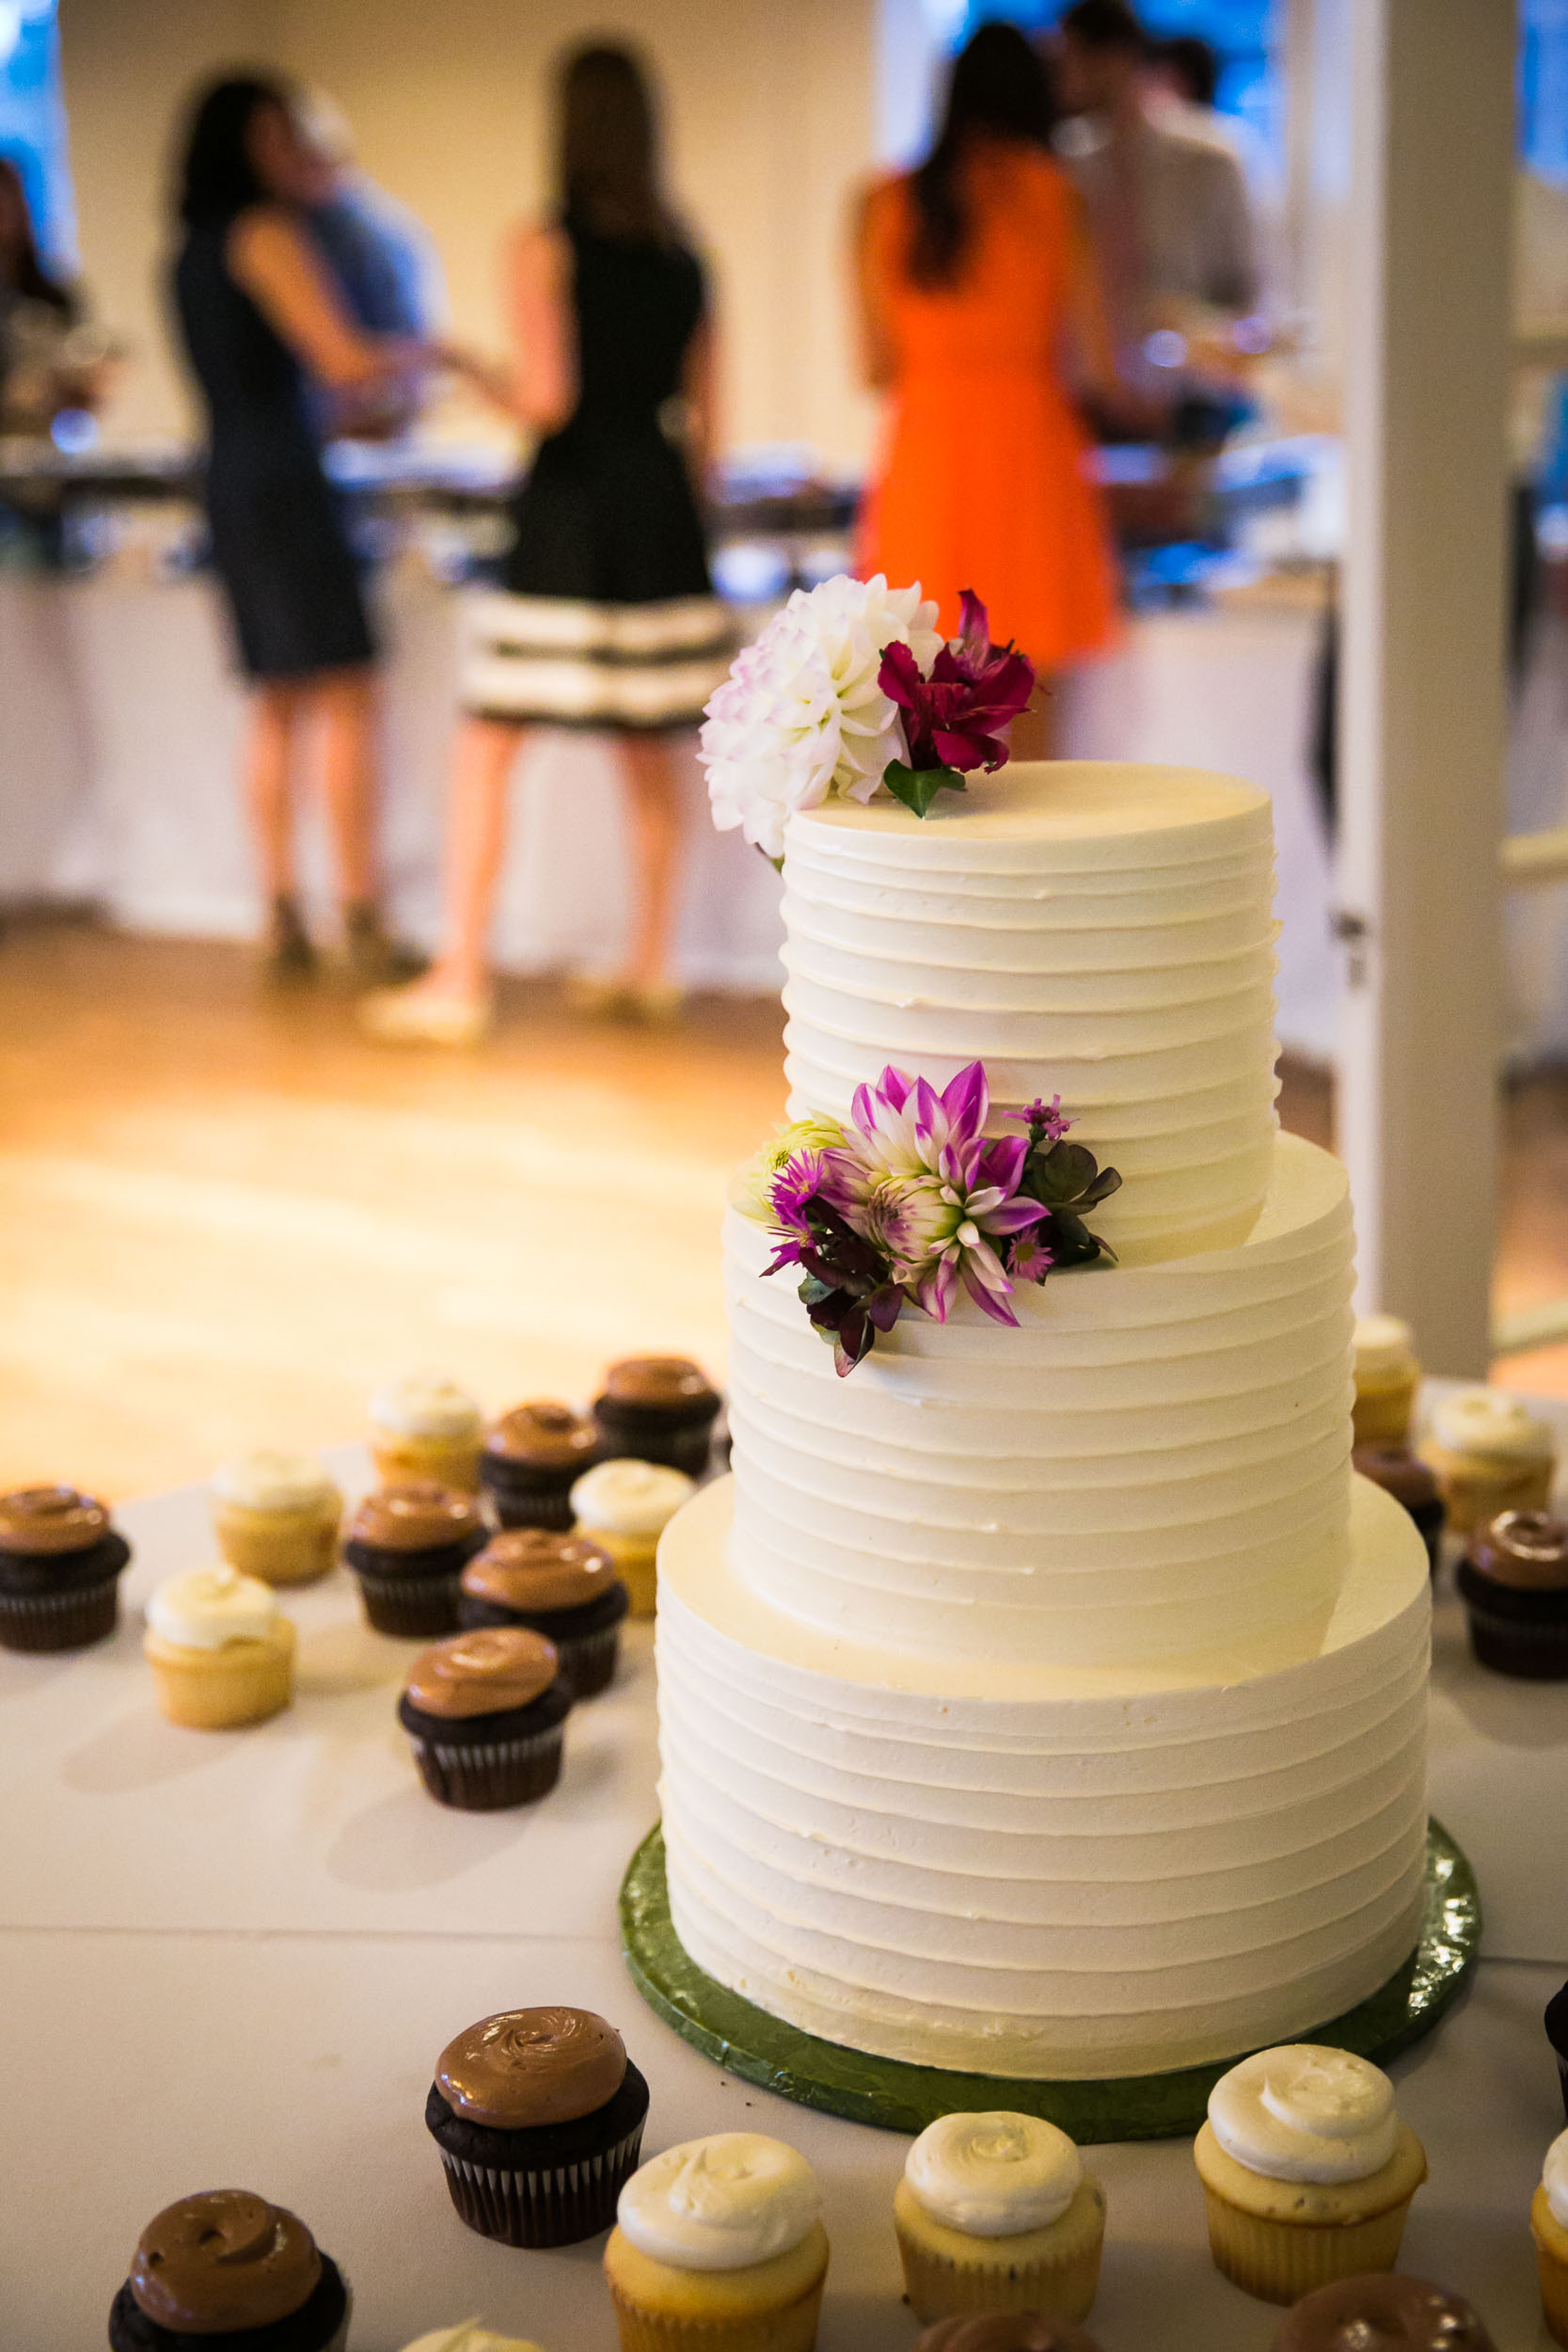 Simple wedding cake | The Hall at Greenlake Wedding Reception Photo | By G. Lin Photography